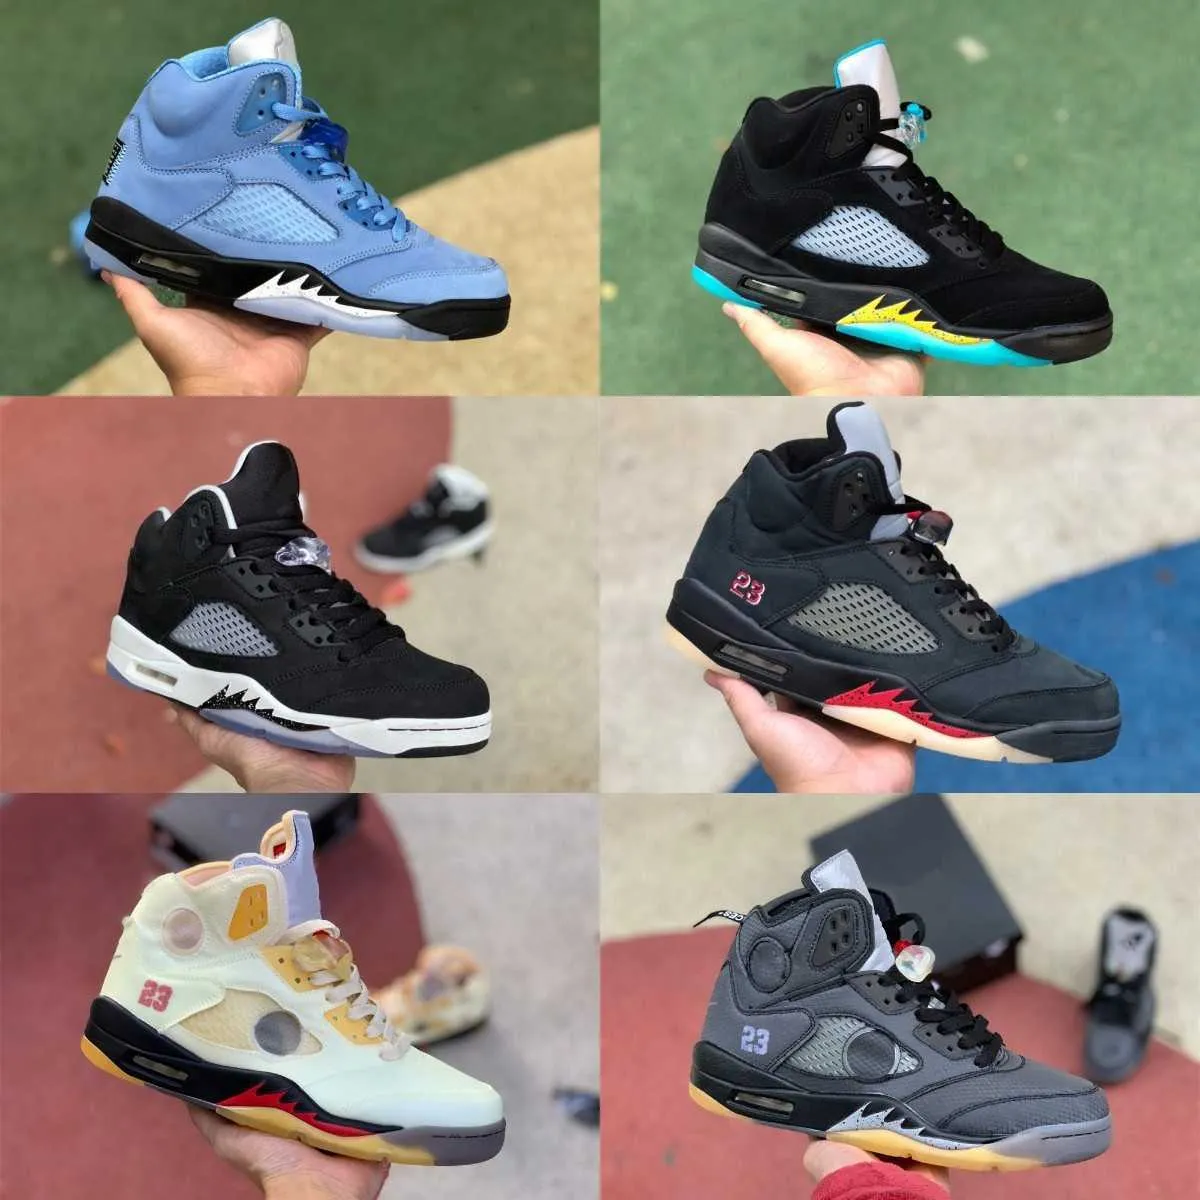 Jumpman What the 5 5s High Basketball Shoes Herr Sail Muslin Stealth 2.0 Raging Bull White Red Top 3 Unc Aqua Oreo Gore Tex Ice Off Noir Bred Alternative Bel Trainer Sneakers